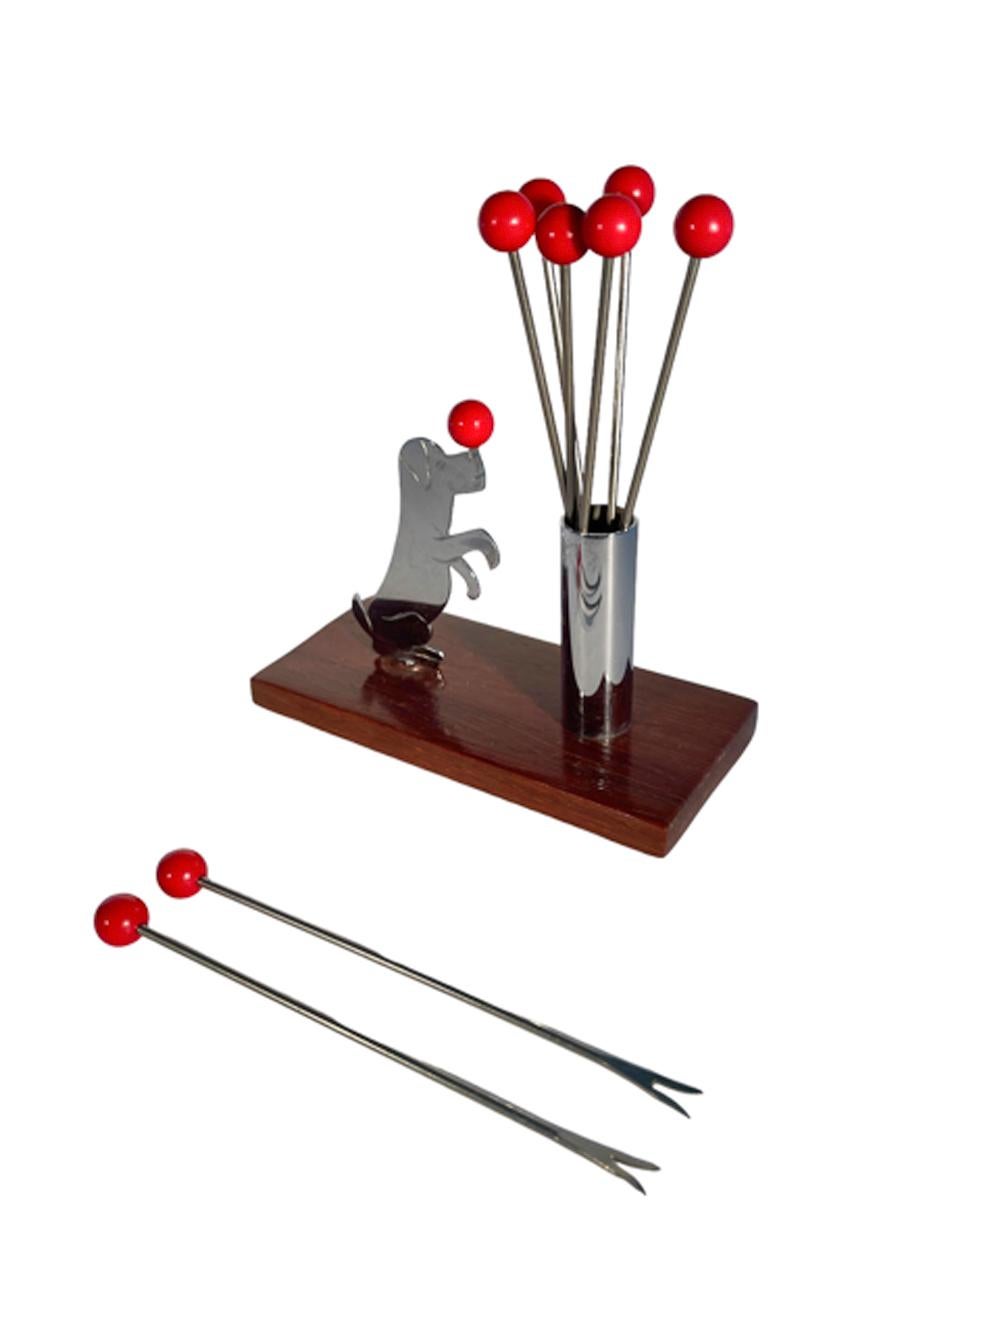 American Art Deco Set of Eight Cocktail Picks with a Dog Balancing a Ball on Its Nose